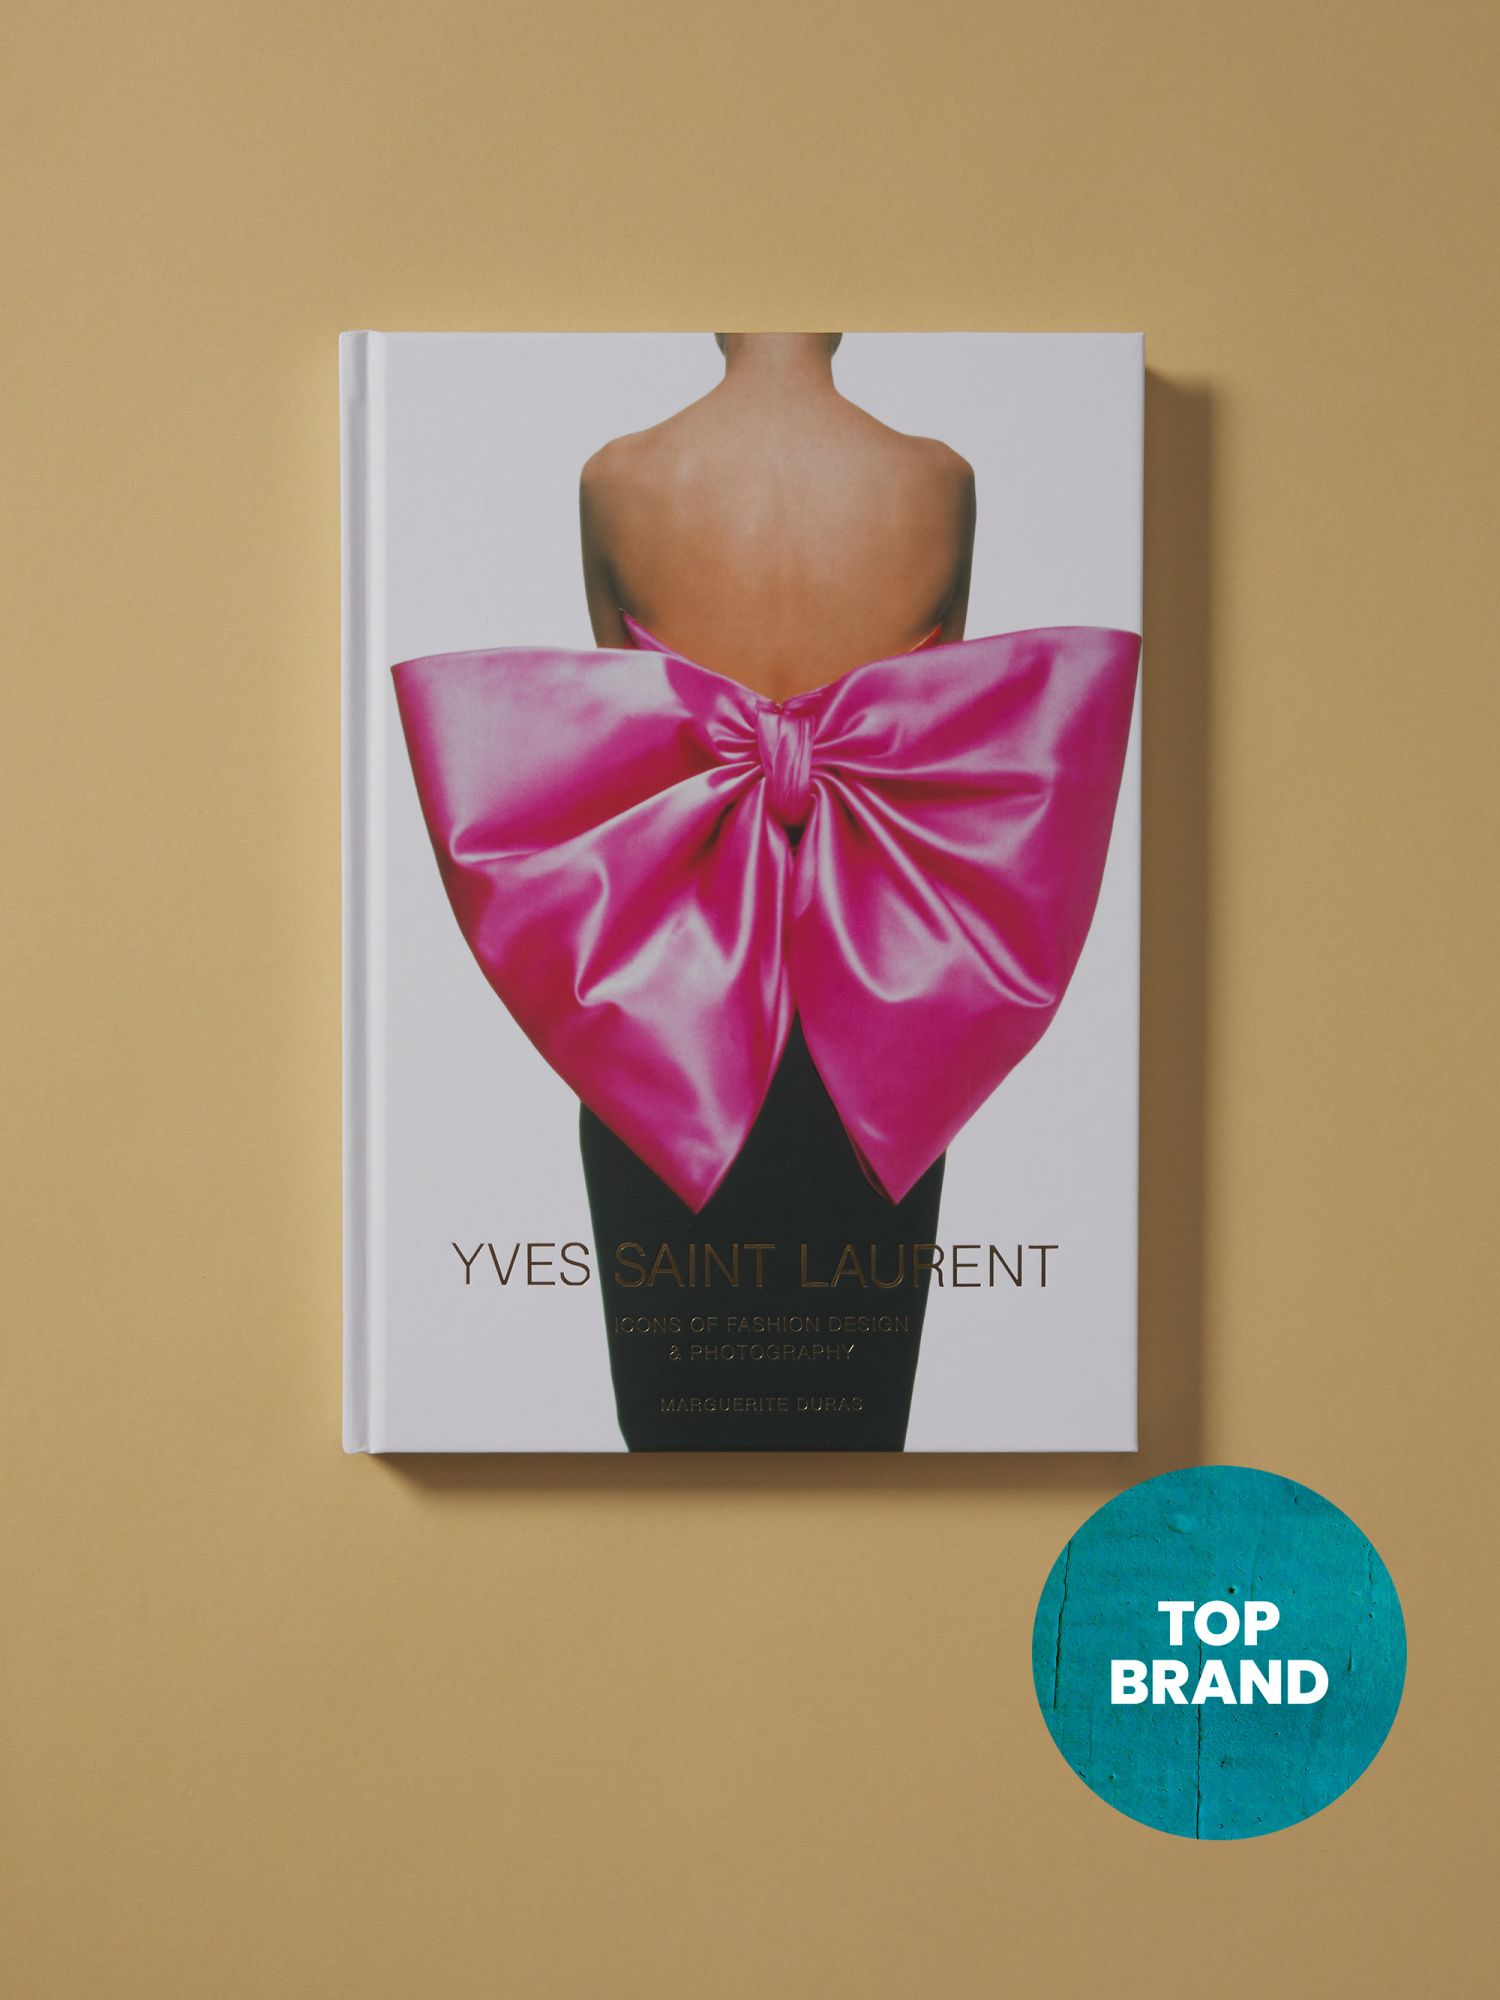 Made In Italy Yves Saint Laurent Coffee Table Book | Decorative Accents | HomeGoods | HomeGoods